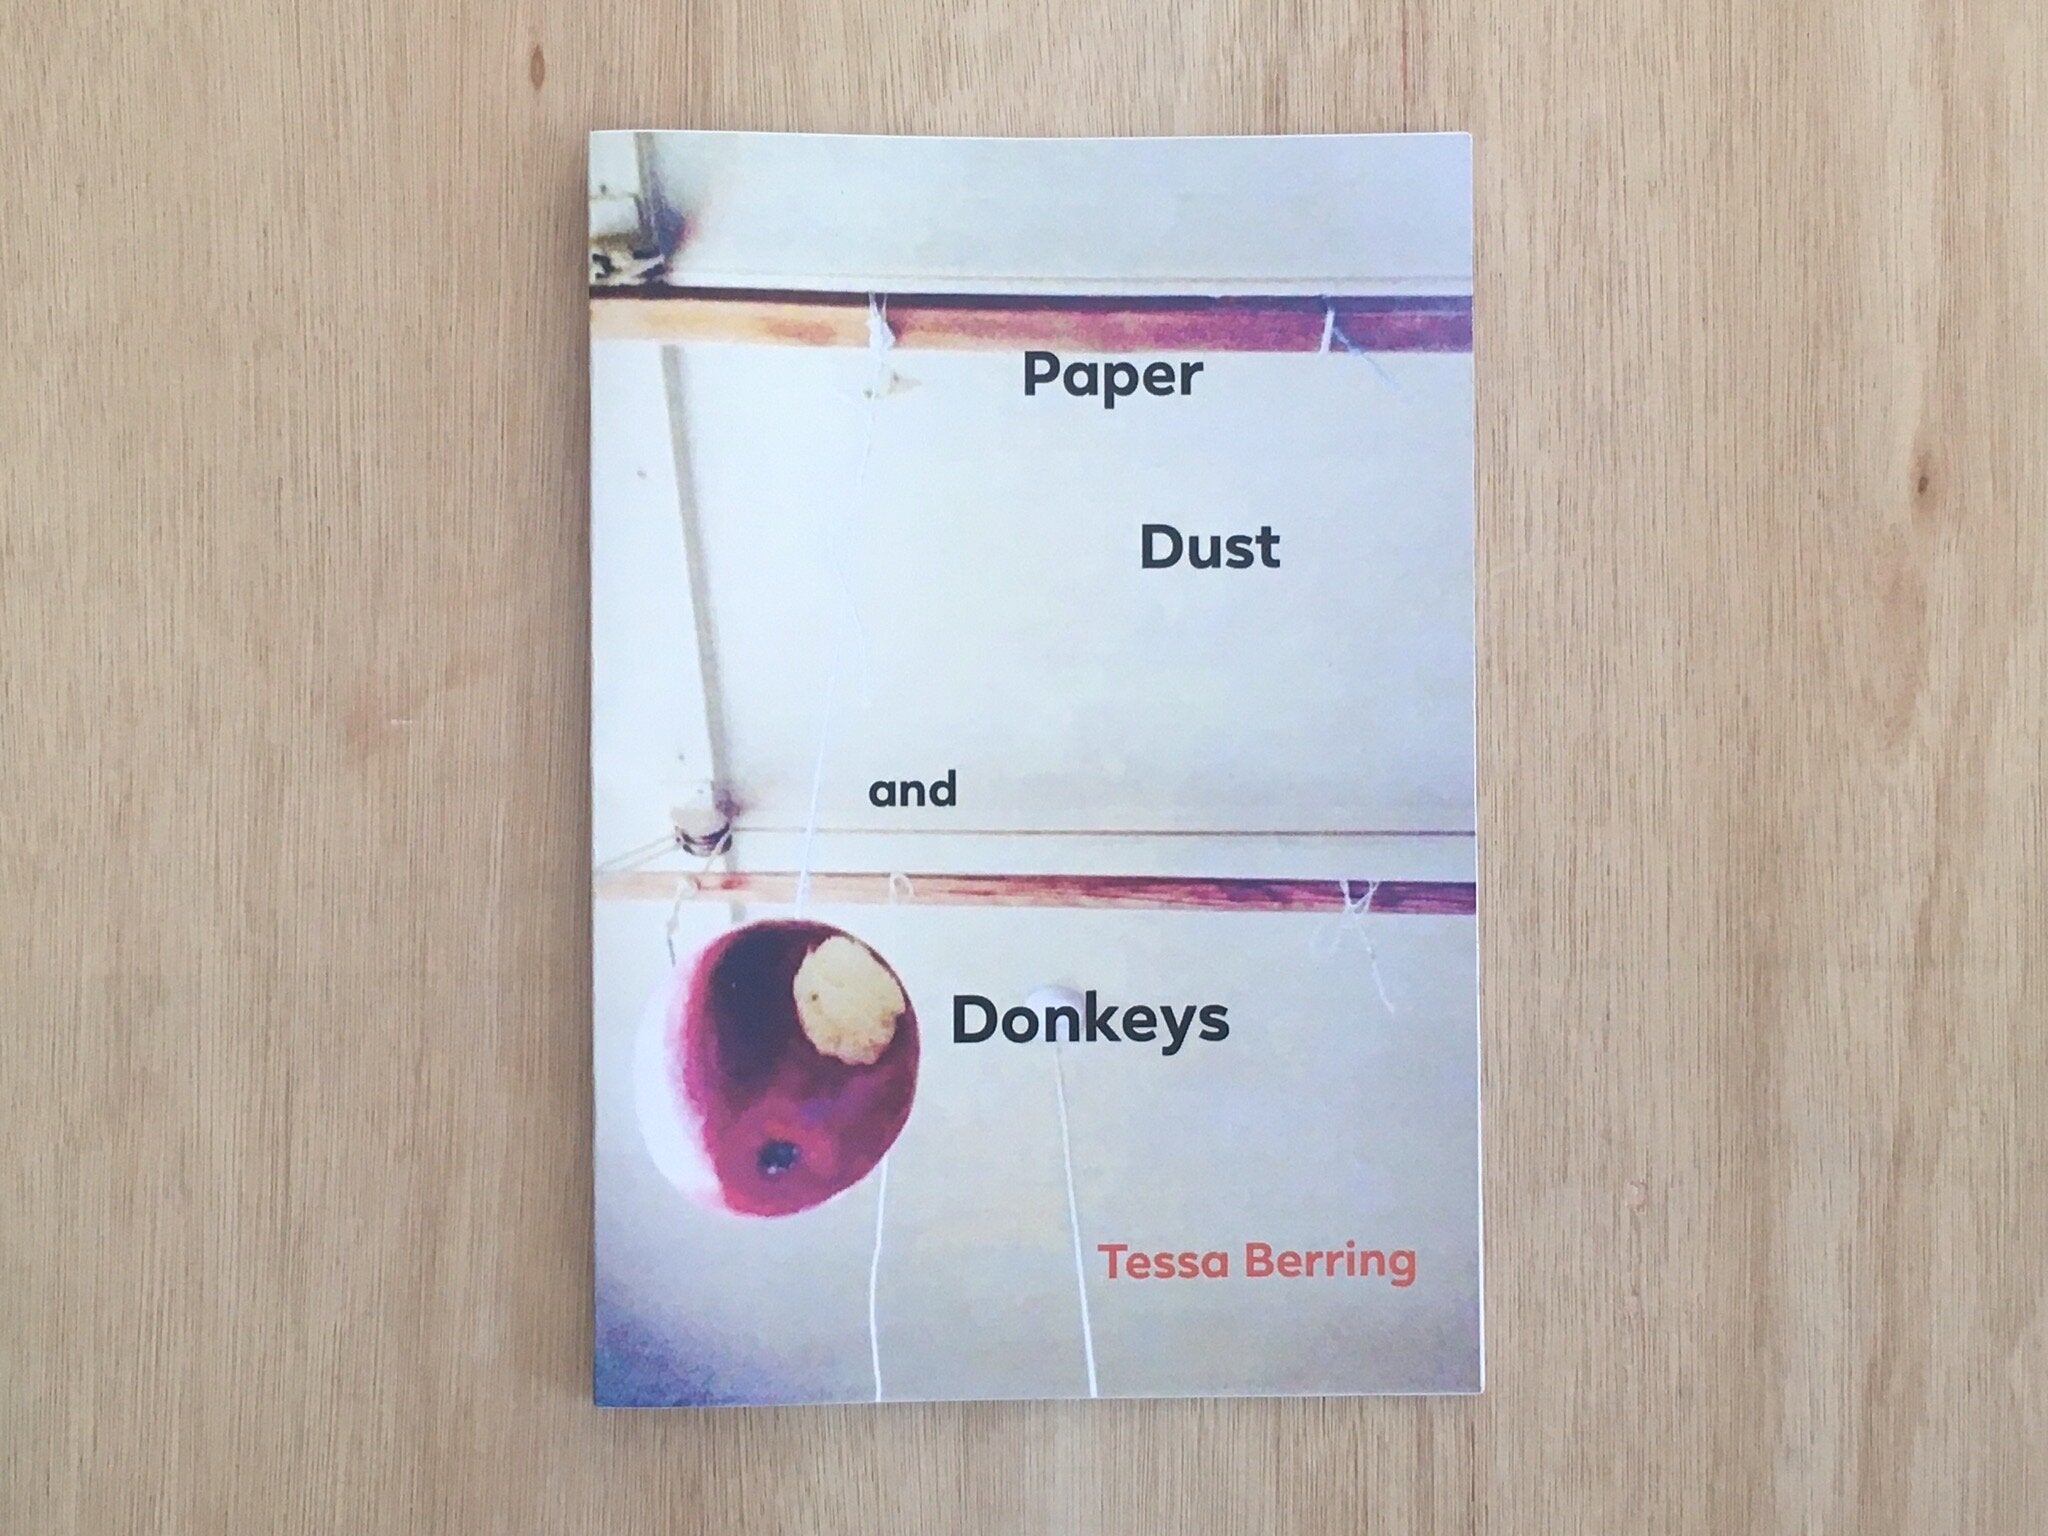 PAPER DUST AND DONKEYS by Tessa Berring